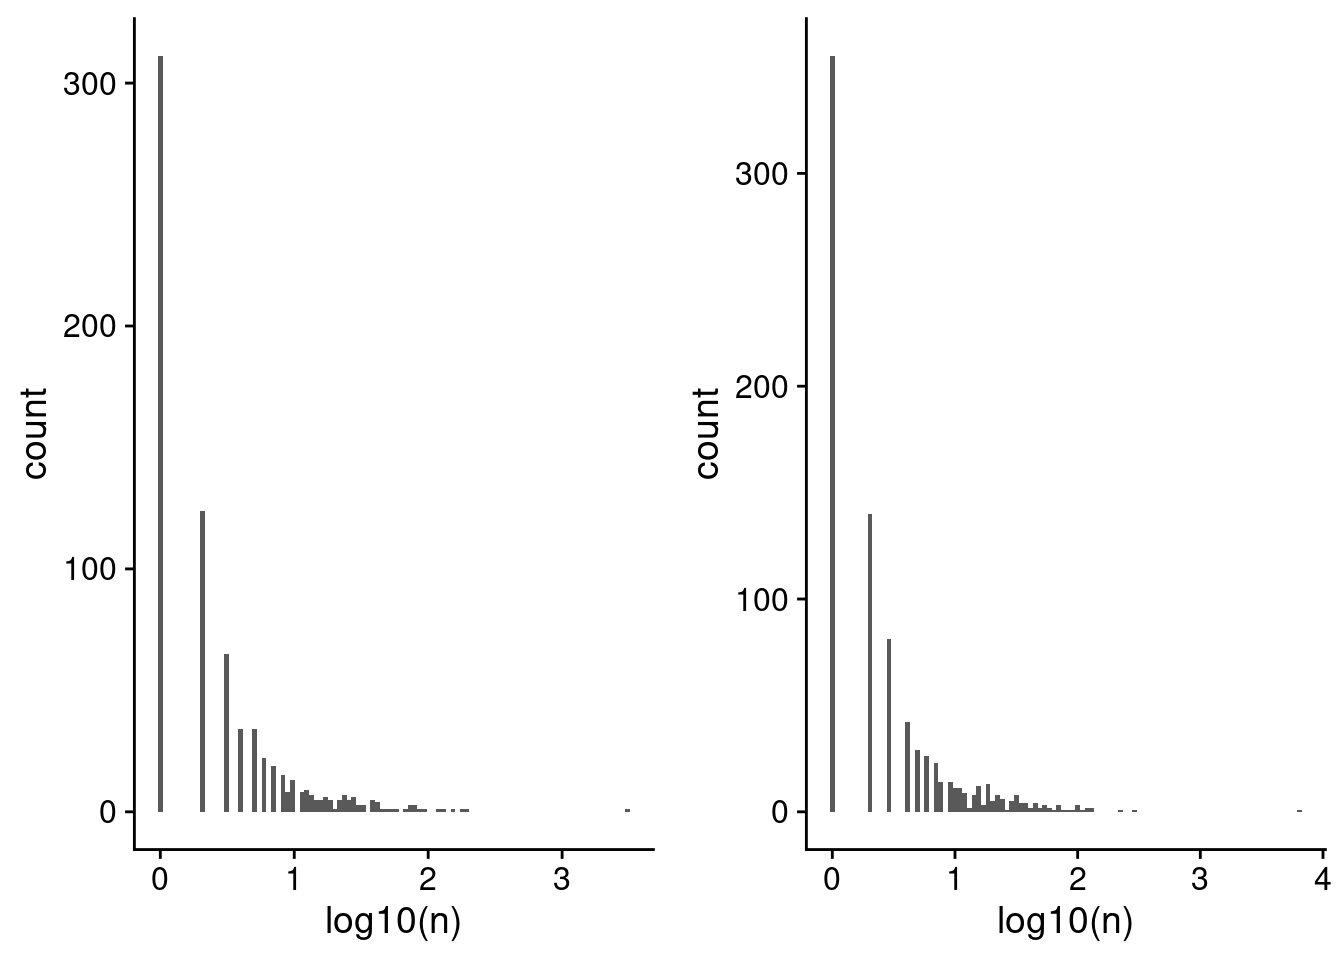 Distribution of the number of cell barcodes assigned to each lenti-barcode for (a) Capture 4 and (b) capture 5. Note the x-axis is on the log10 scale, as both have an extreme outlier.